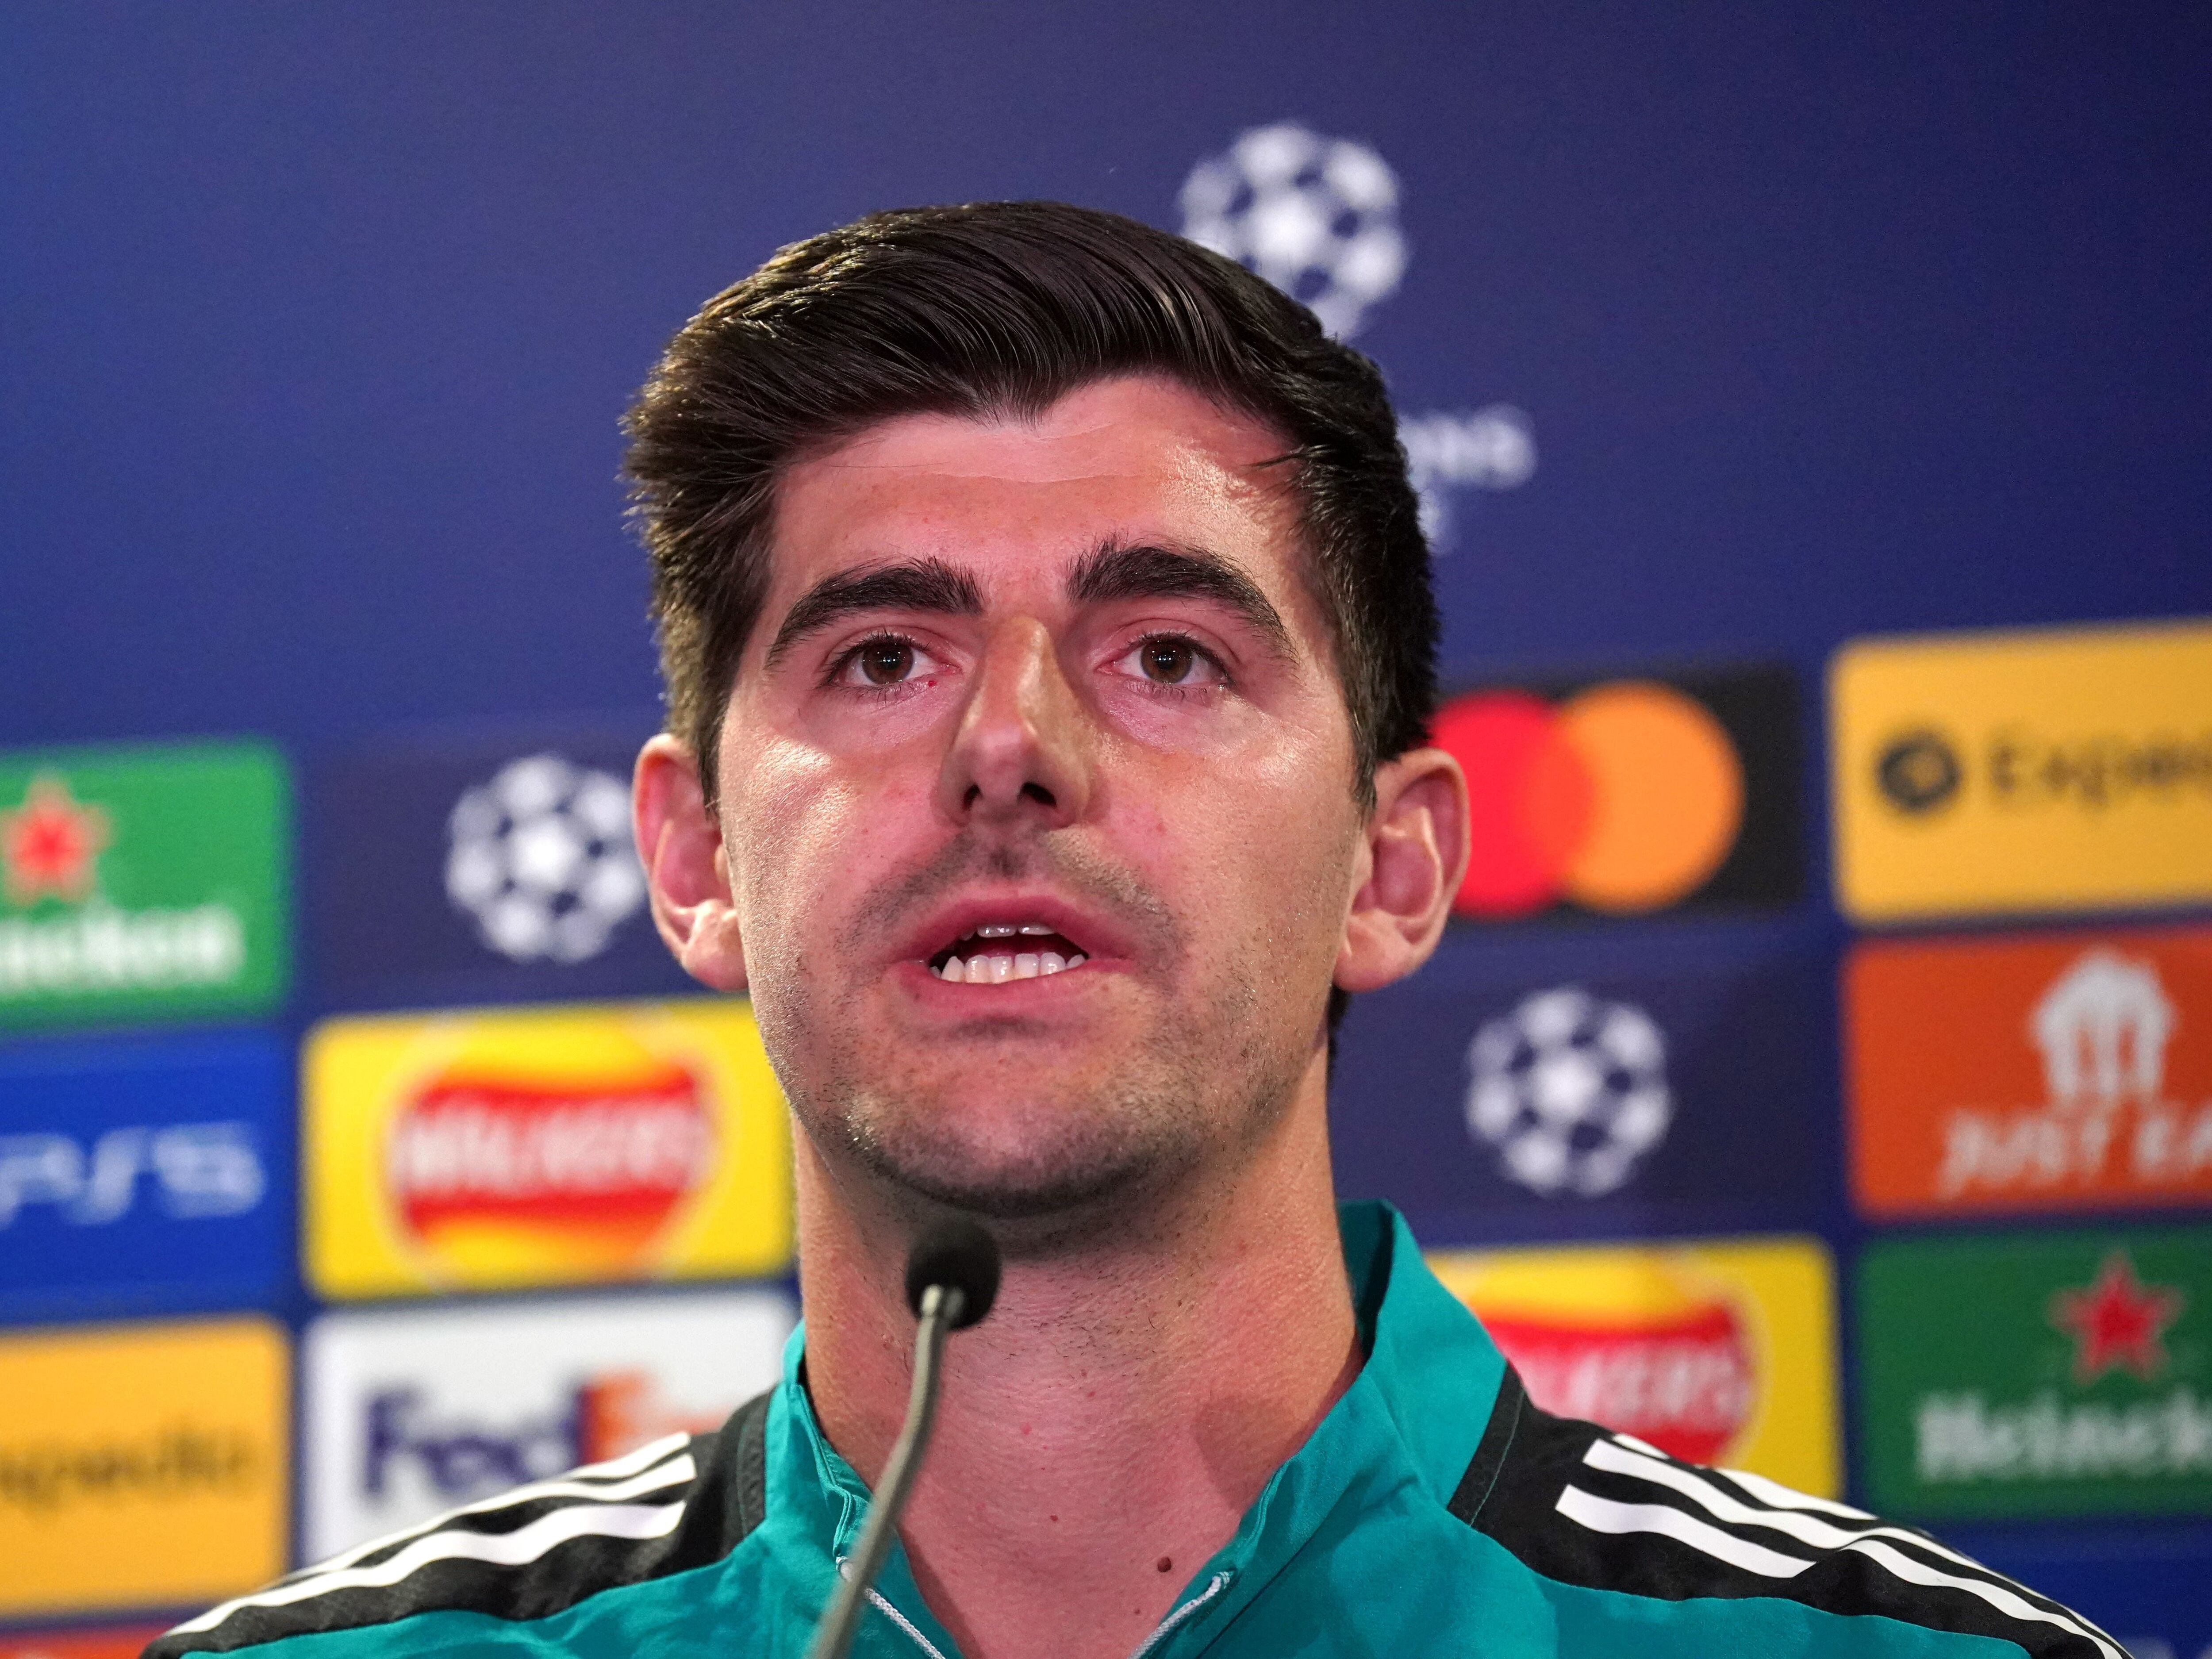 Thibaut Courtois says Chelsea are ‘one of the best clubs in the world’